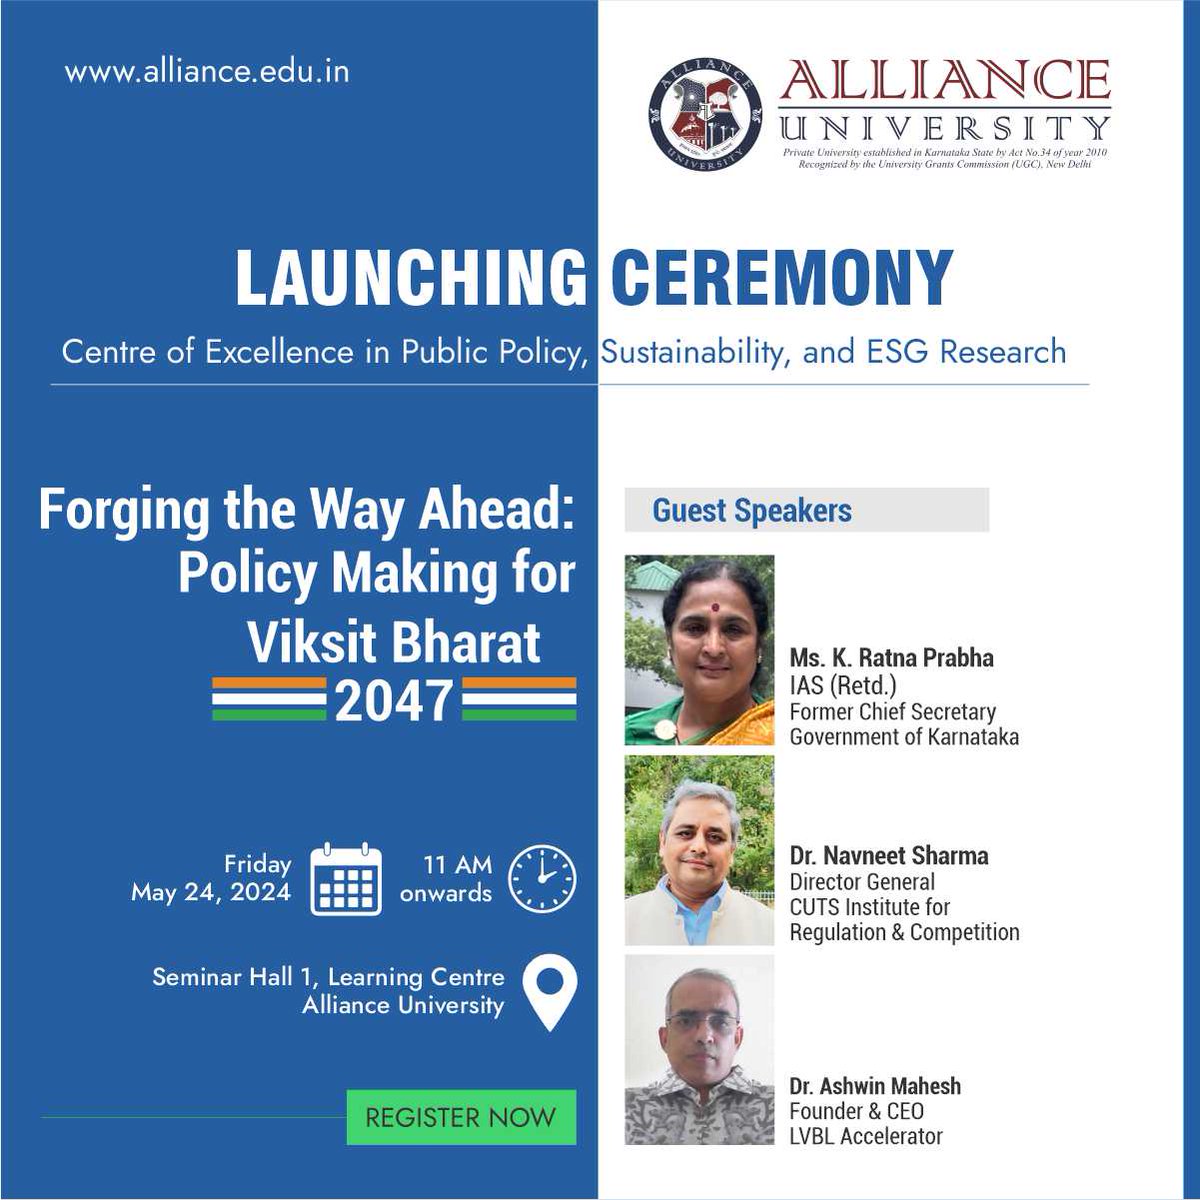 Alliance University is set to launch the Centre of Excellence in Public Policy, Sustainability, and ESG Research on May 24, 2024 (11 a.m. onwards) in the Seminar Hall I, Learning Centre. Register Now: forms.gle/WZLctdbvLnnAp6… #WeTheAlliance #Research@Alliance